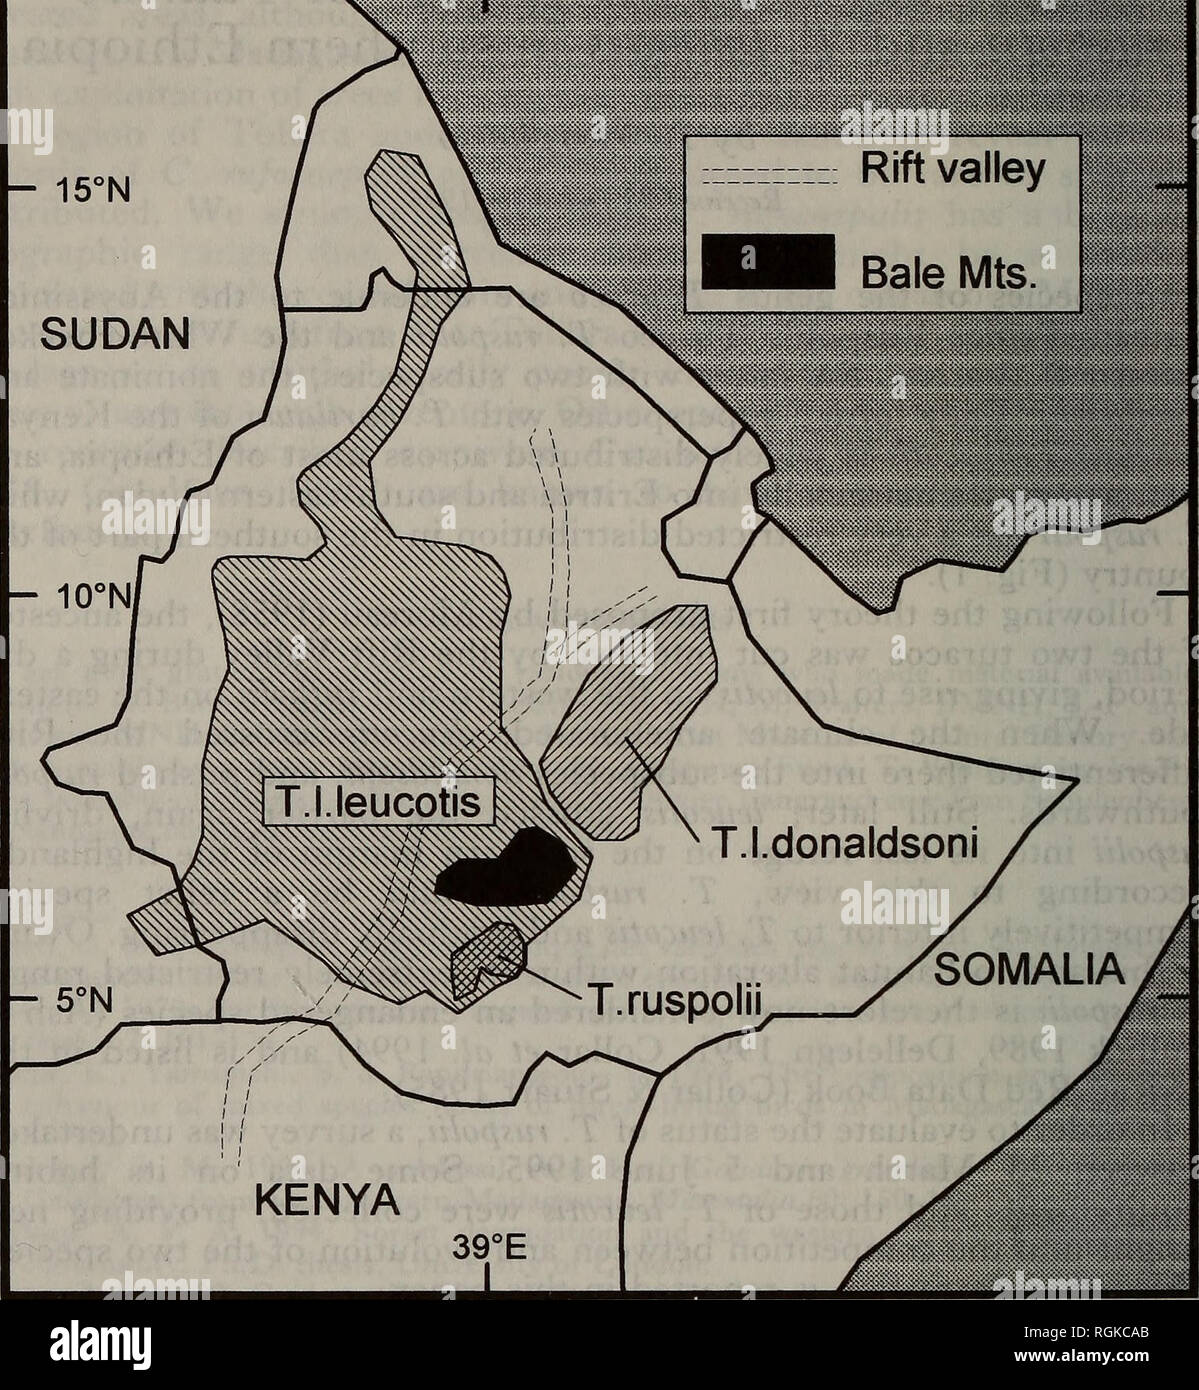 . Bulletin of the British Ornithologists' Club. Birds. L. Borghesio 12 Bull.B.O.C. 1997 117(1) - IS-'N SUDAN Rift valley Bale Mts. - lO^'N,. Figure 1. Distribution of the Ethiopian turacos. margins up to Acacia-dominated woodlands, in the latter only as long as the preferred food plants, especially figs (Ficus sycomorus, F. thonningii, F. vasta), were present. Densities in Podocarpus forests were very low and only four individuals were met with there during over 90 hours of search in different localities; since the fruits of isolated Podocarpus trees growing outside forests were readily eaten  Stock Photo